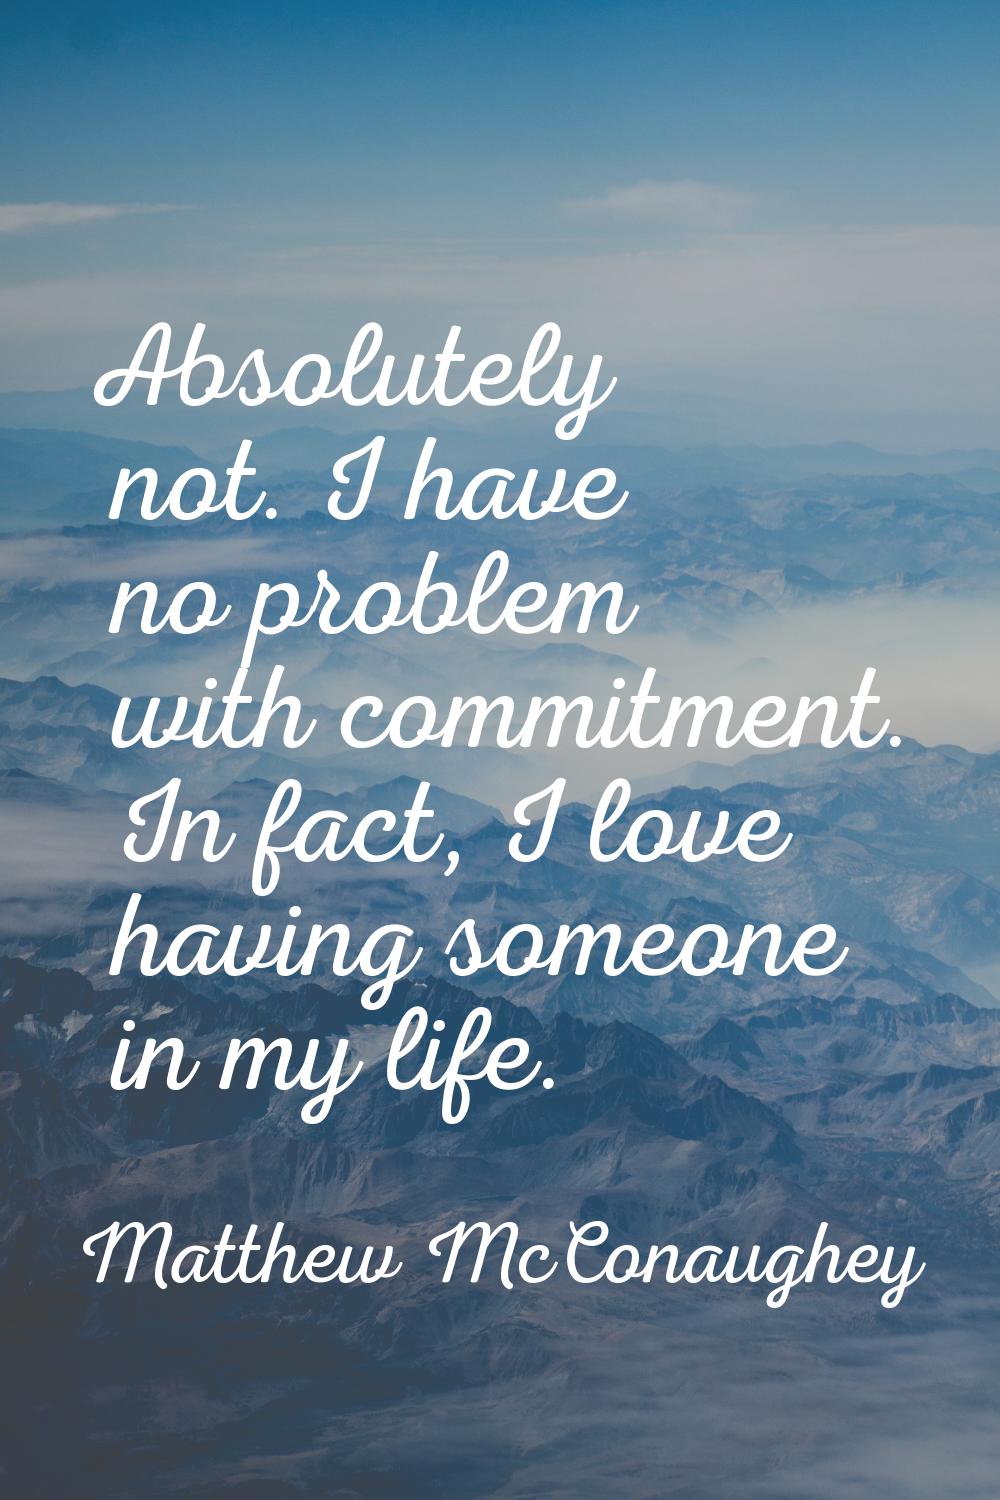 Absolutely not. I have no problem with commitment. In fact, I love having someone in my life.